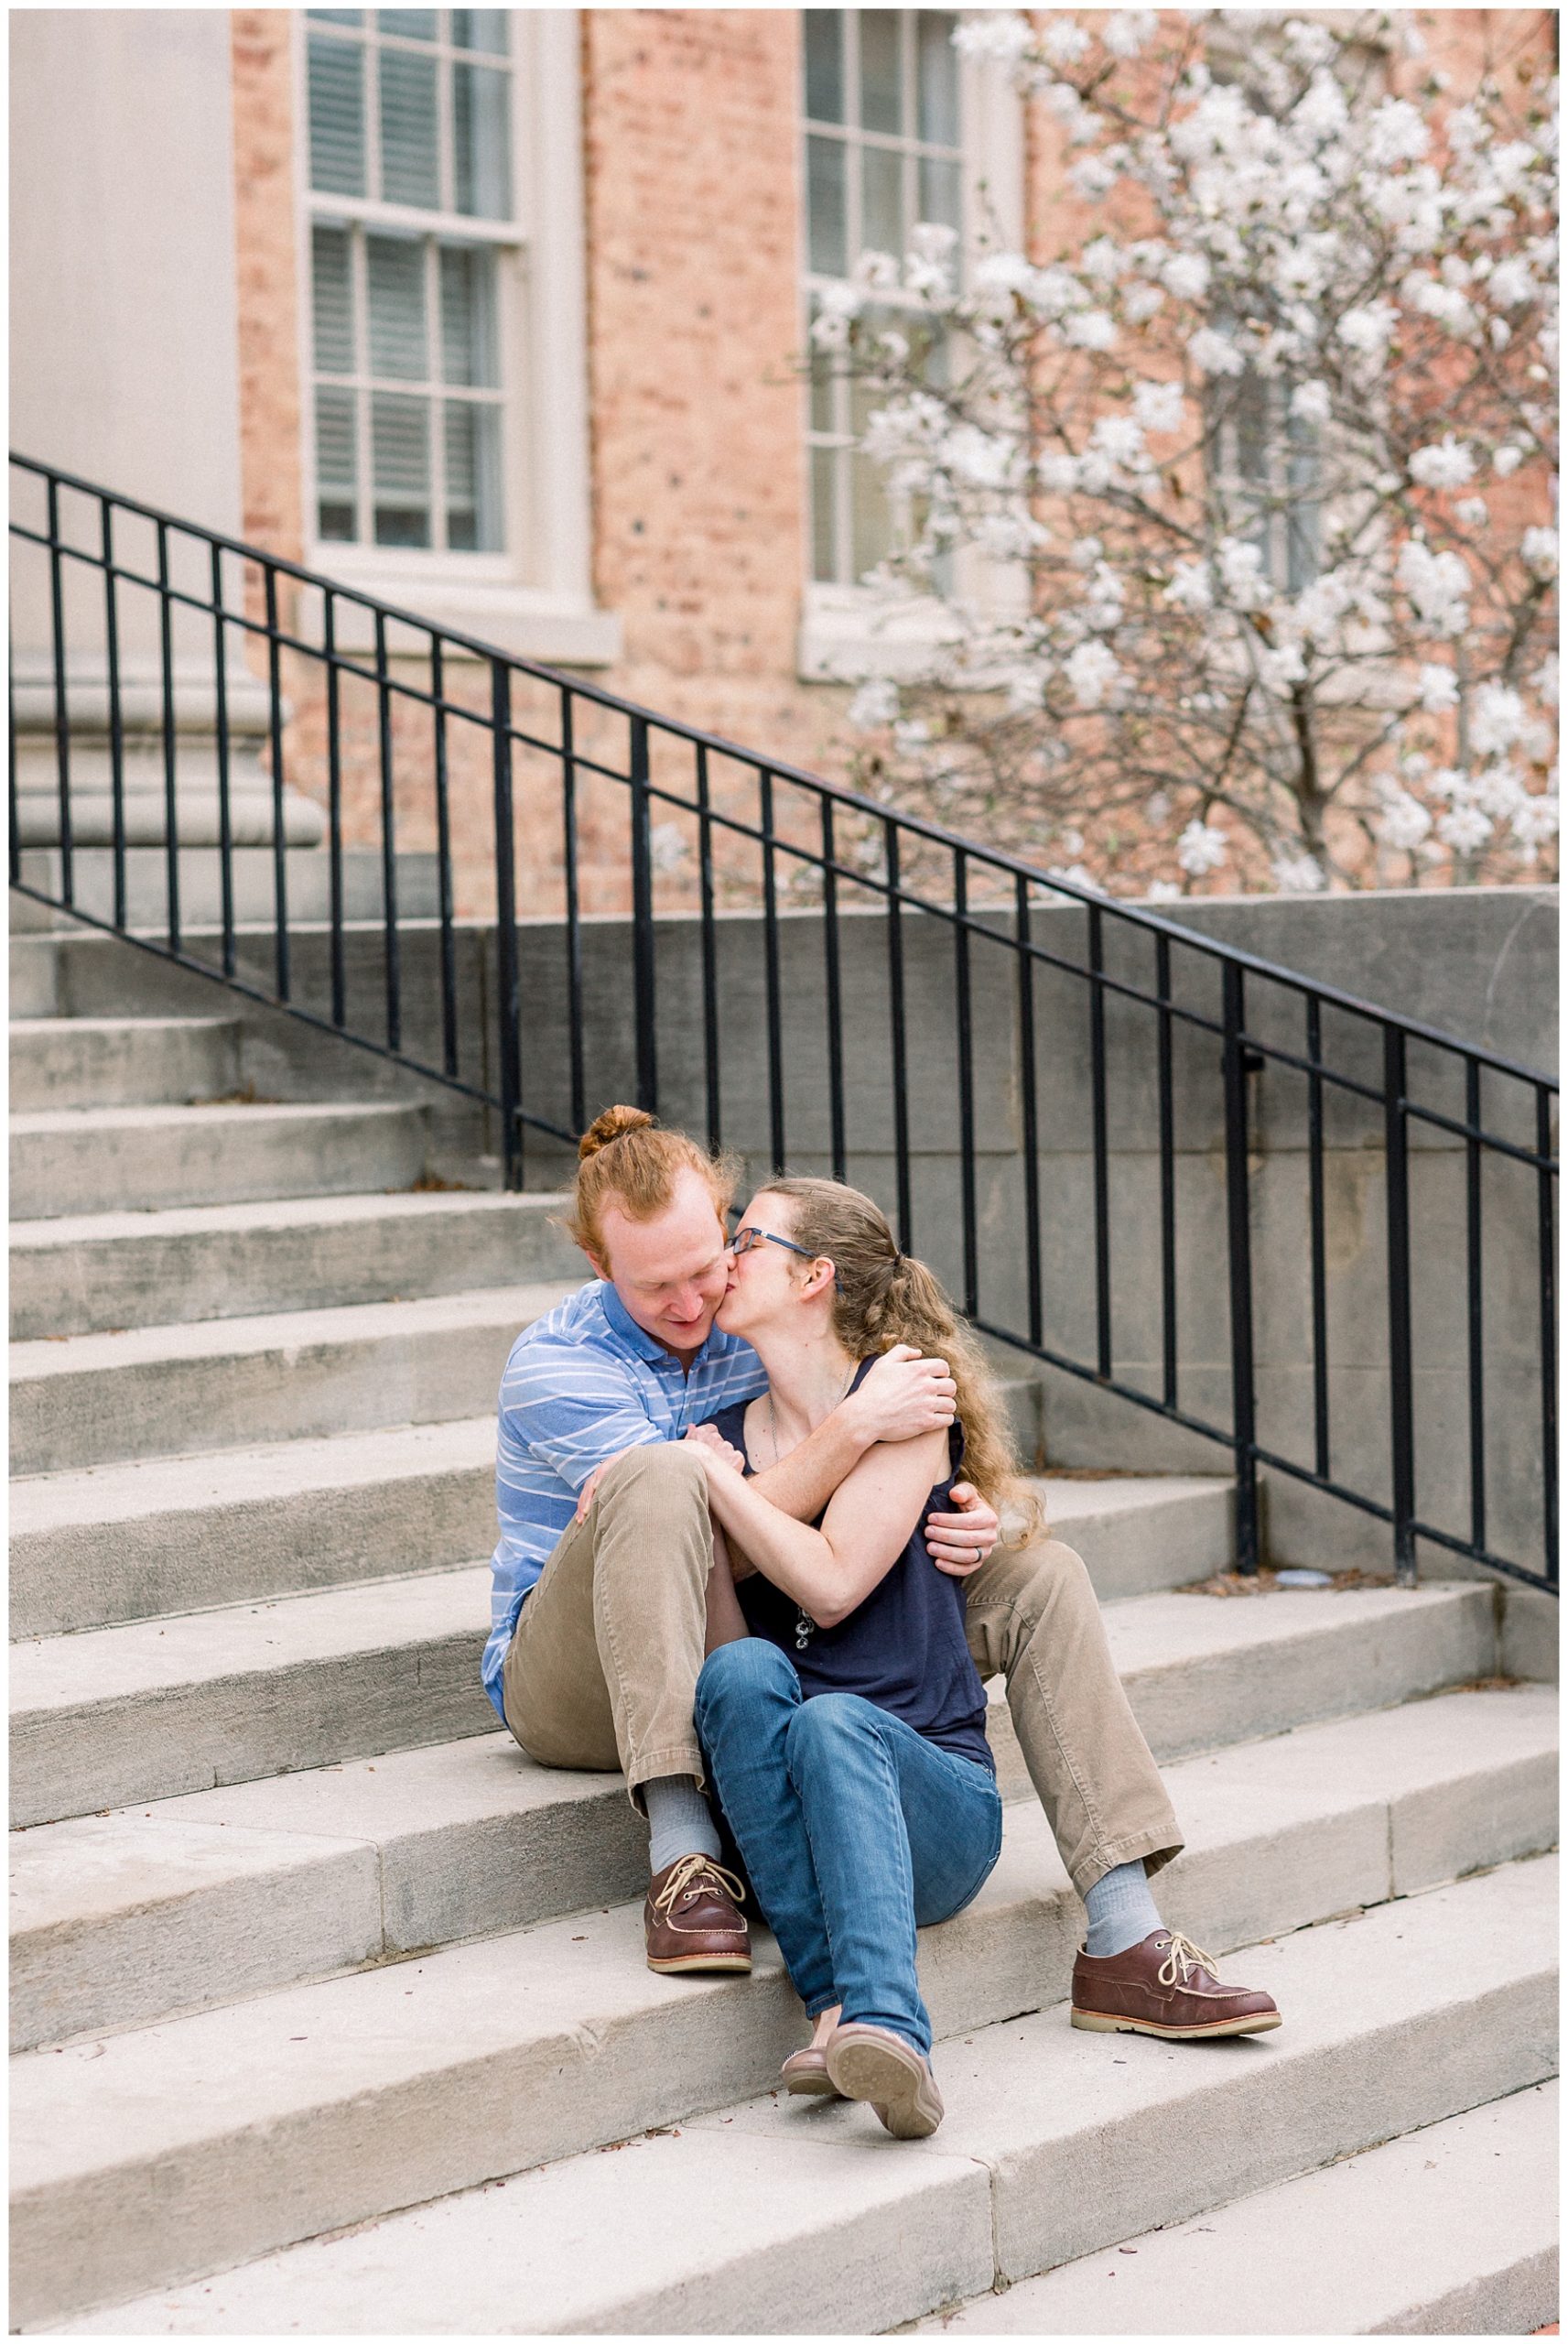 Spring Engagement Session at UNC Chapel Hill at The Well. North Carolina Wedding Photographer.